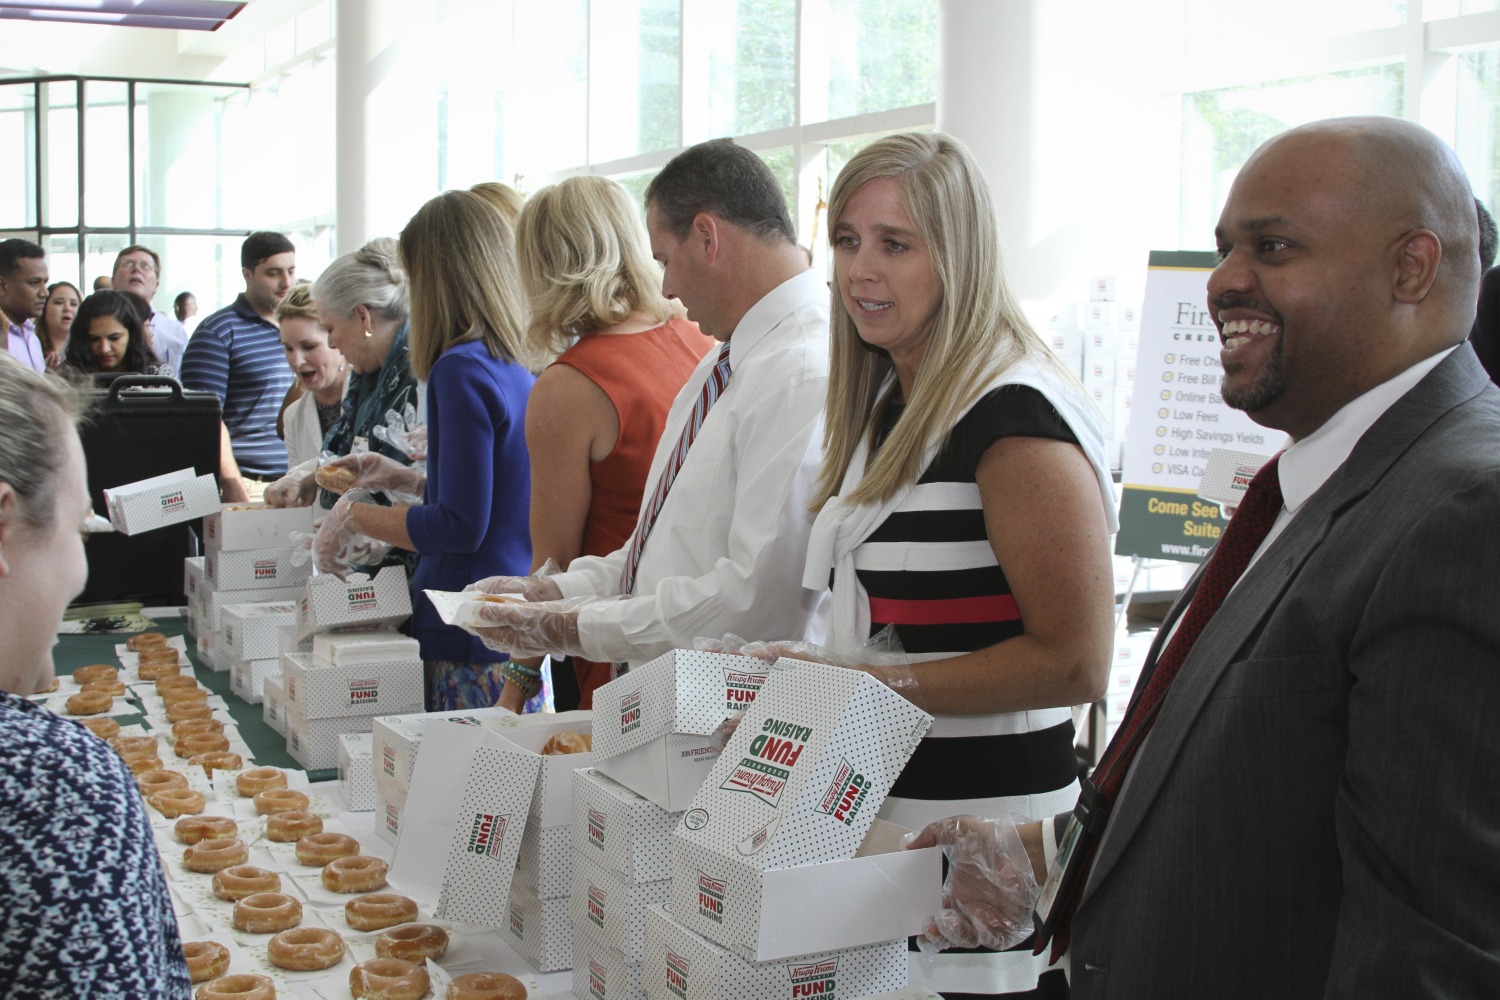 Director Doyle serving donuts with other members of the FDOE leadership team